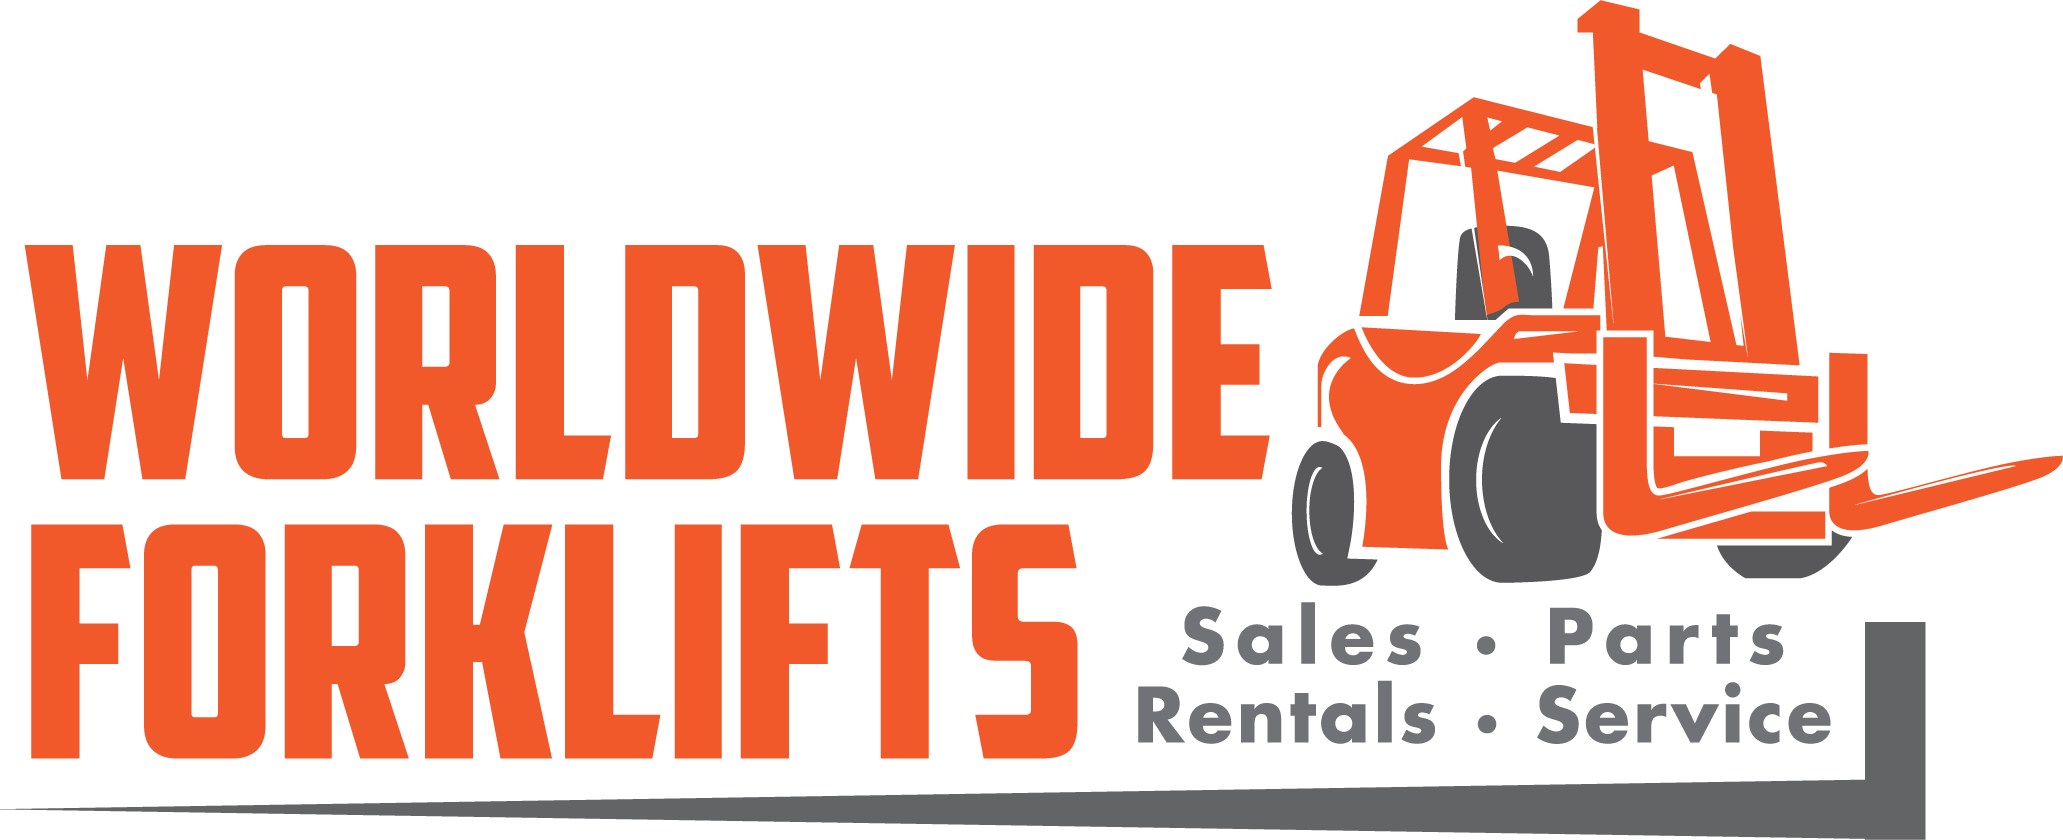 Forklifts From Worldwide Forklifts